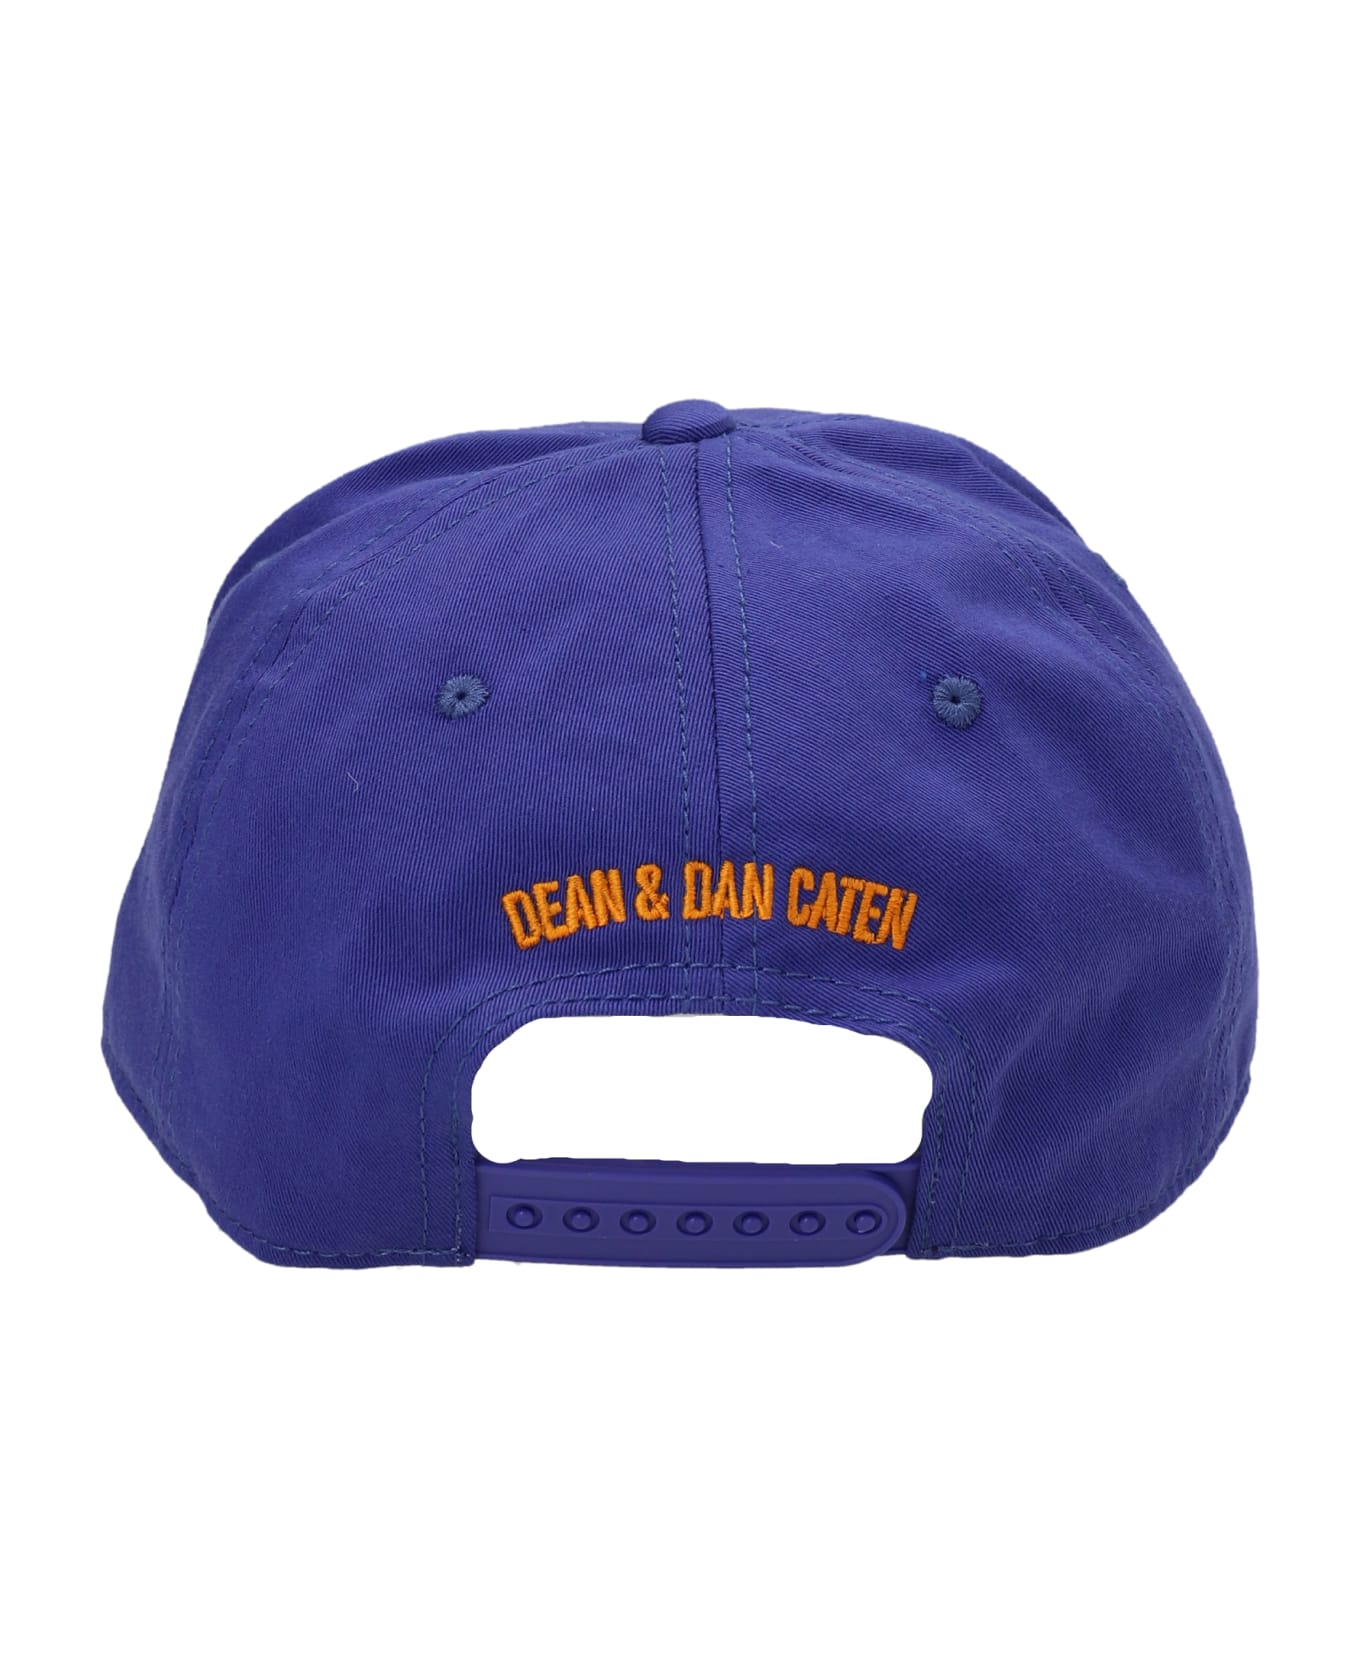 Dsquared2 'one Life One Planet  Cap - Blue